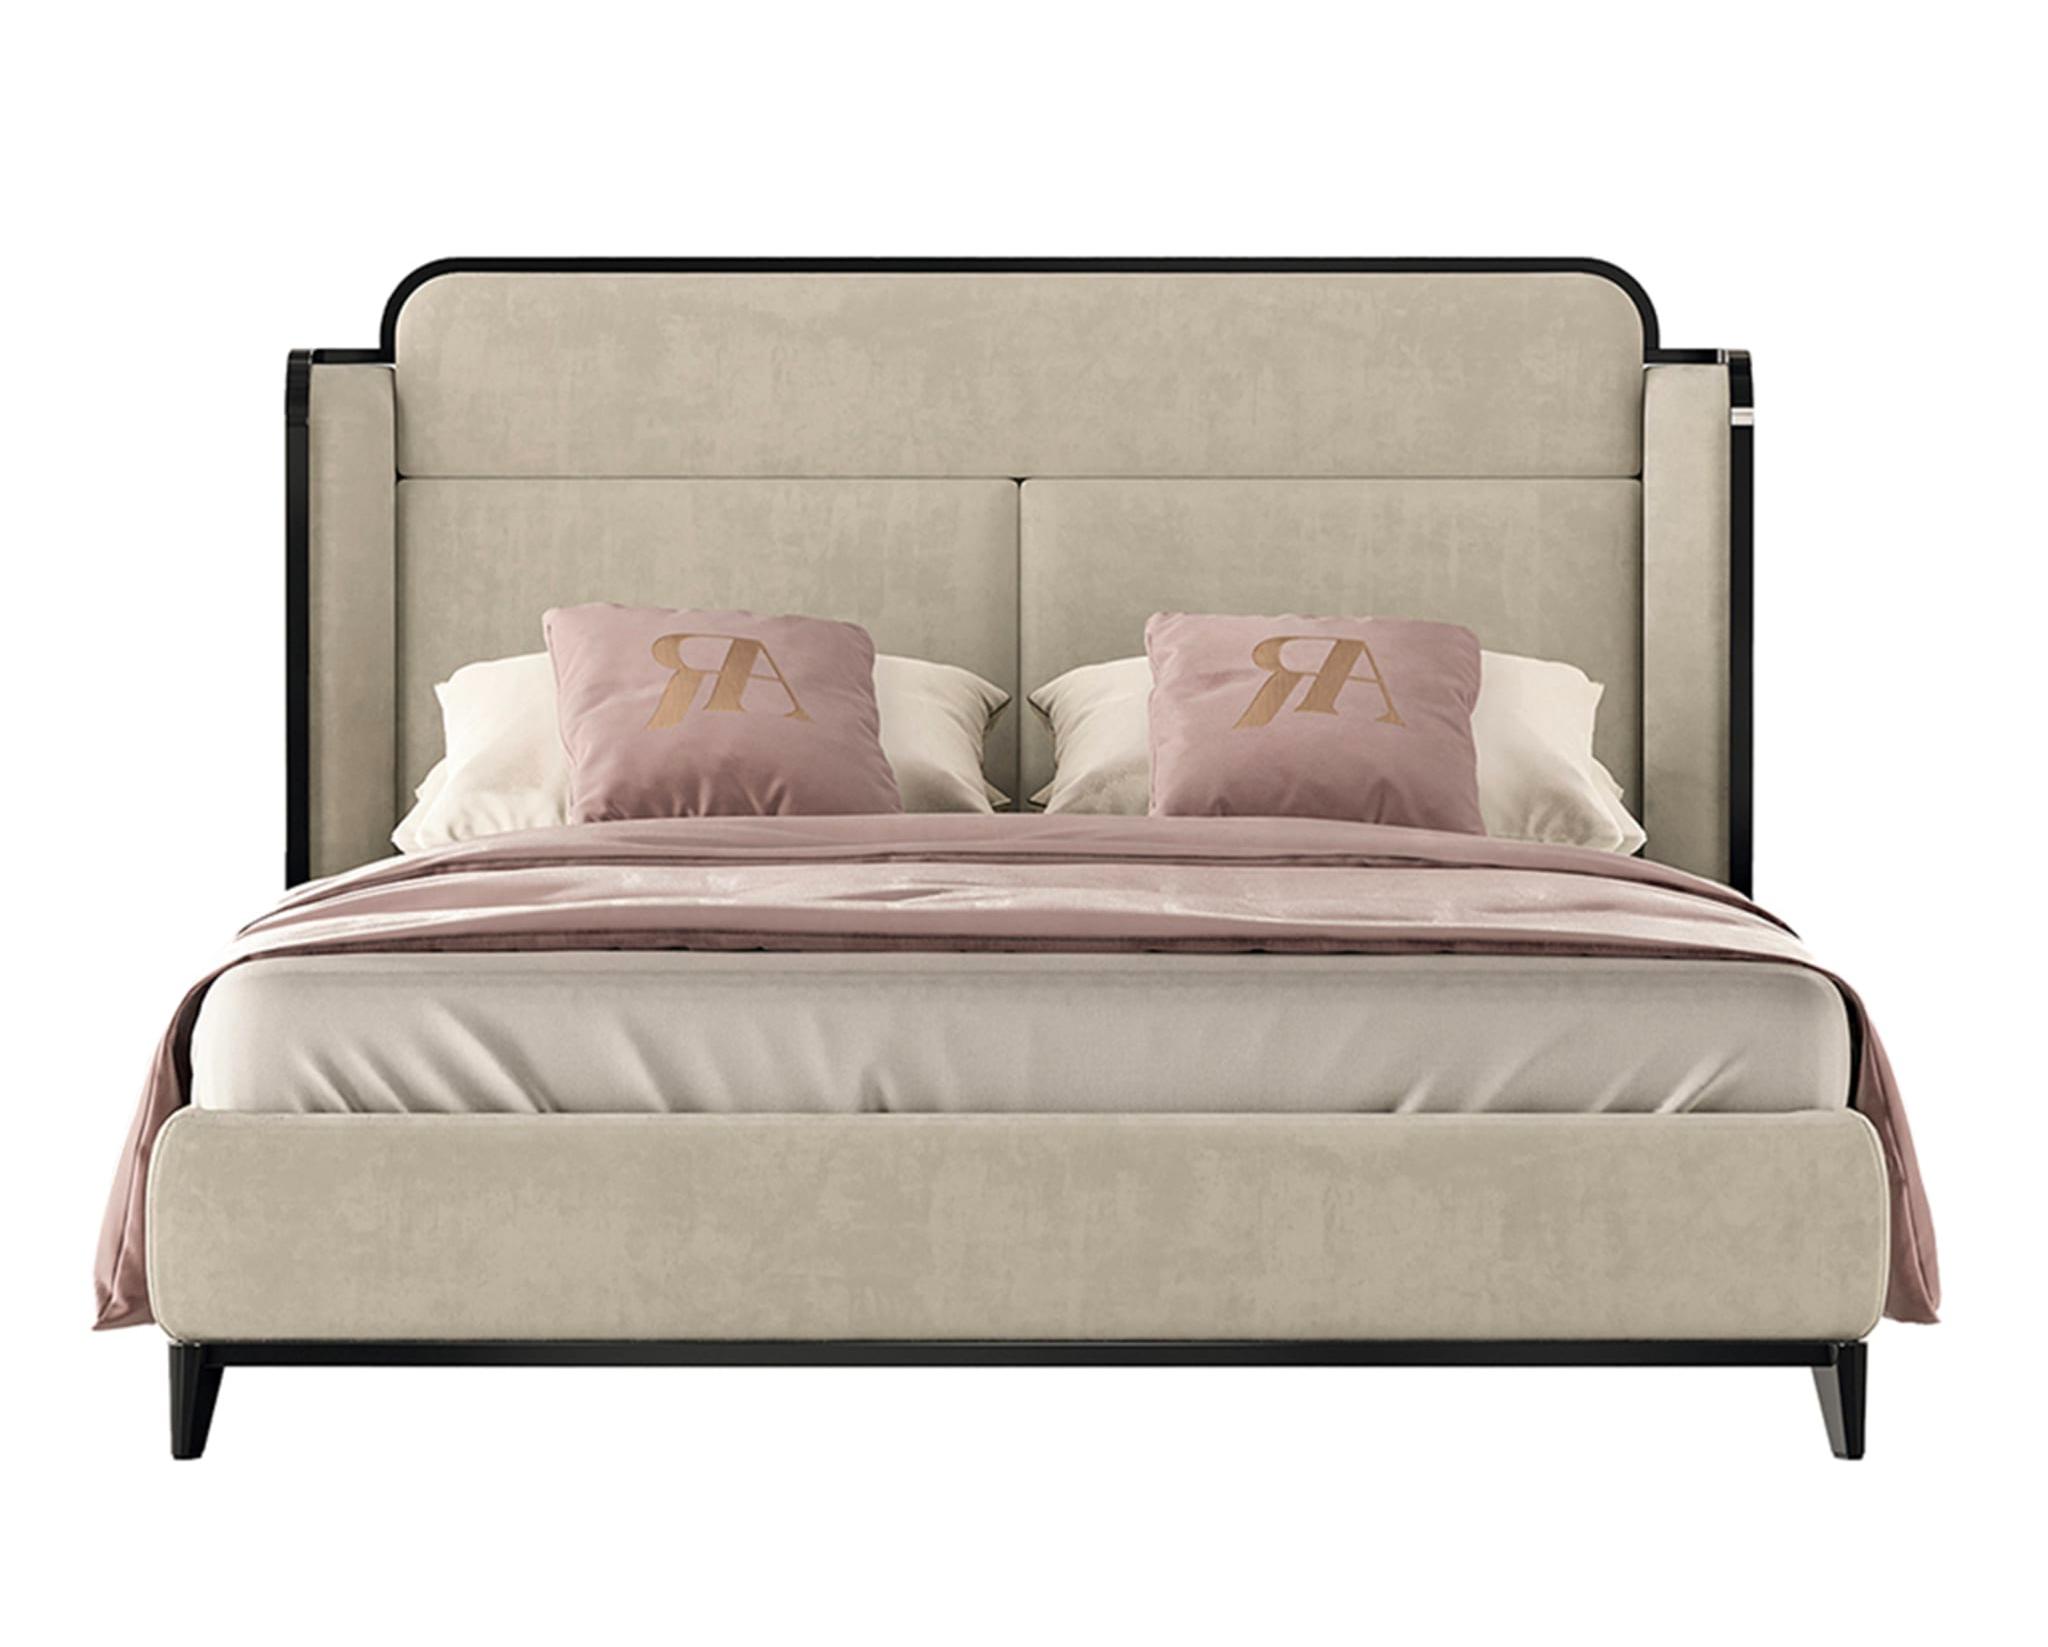 Dilan Handcrafted Premium Bed